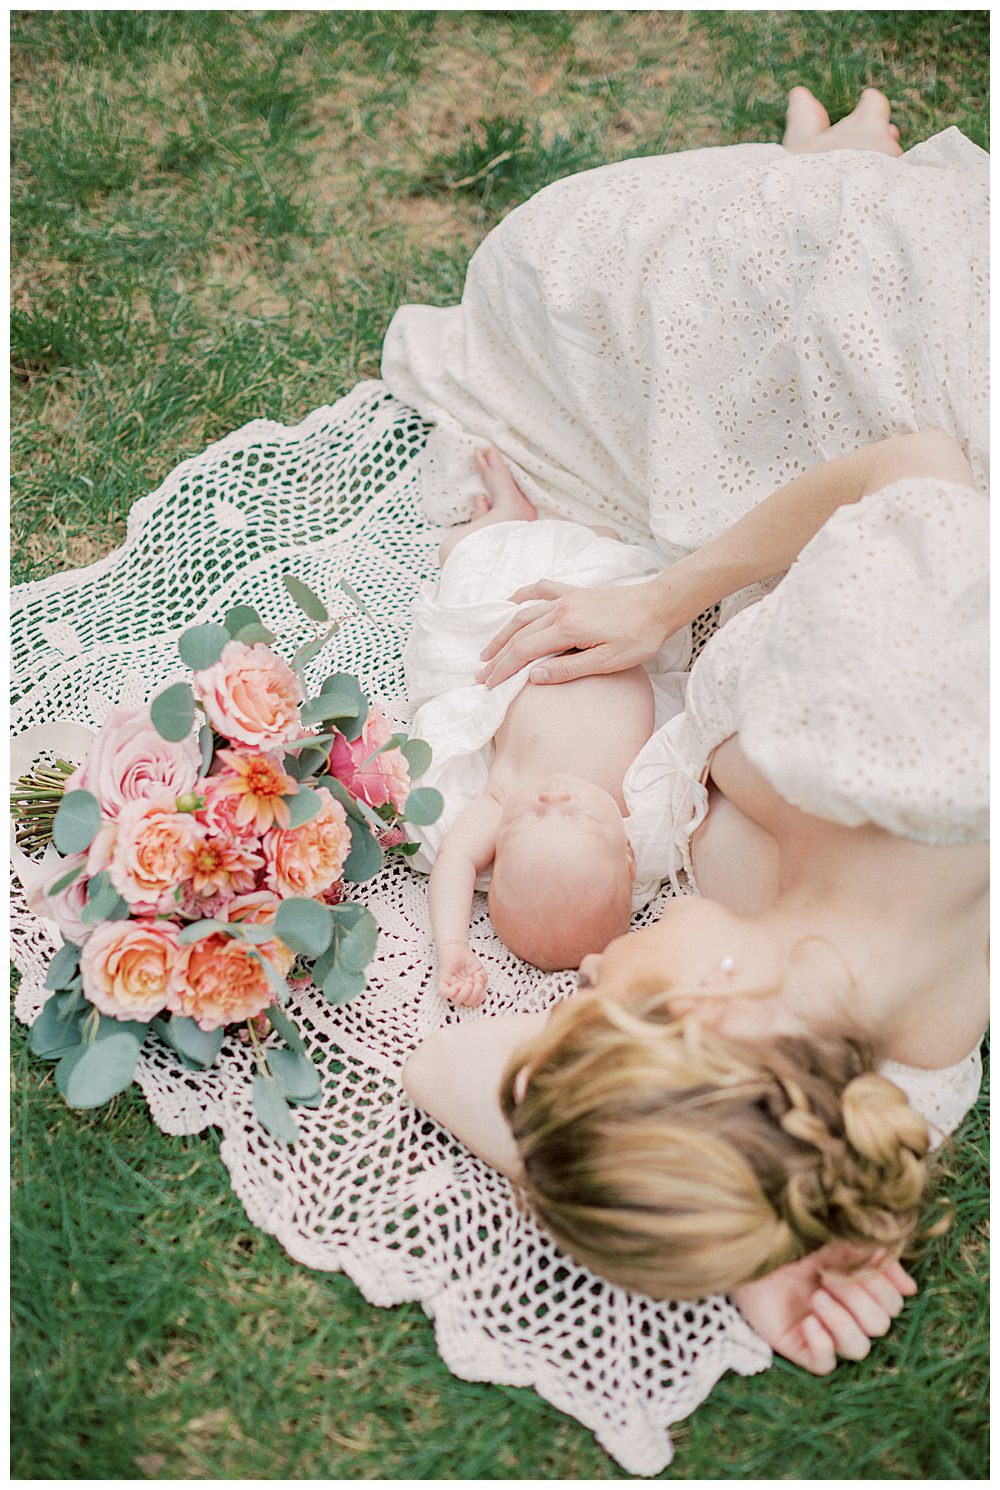 New mother lays on crochet white blanket outside next to her newborn baby and bouquet of roses during outdoor newborn session in Alexandria, VA.